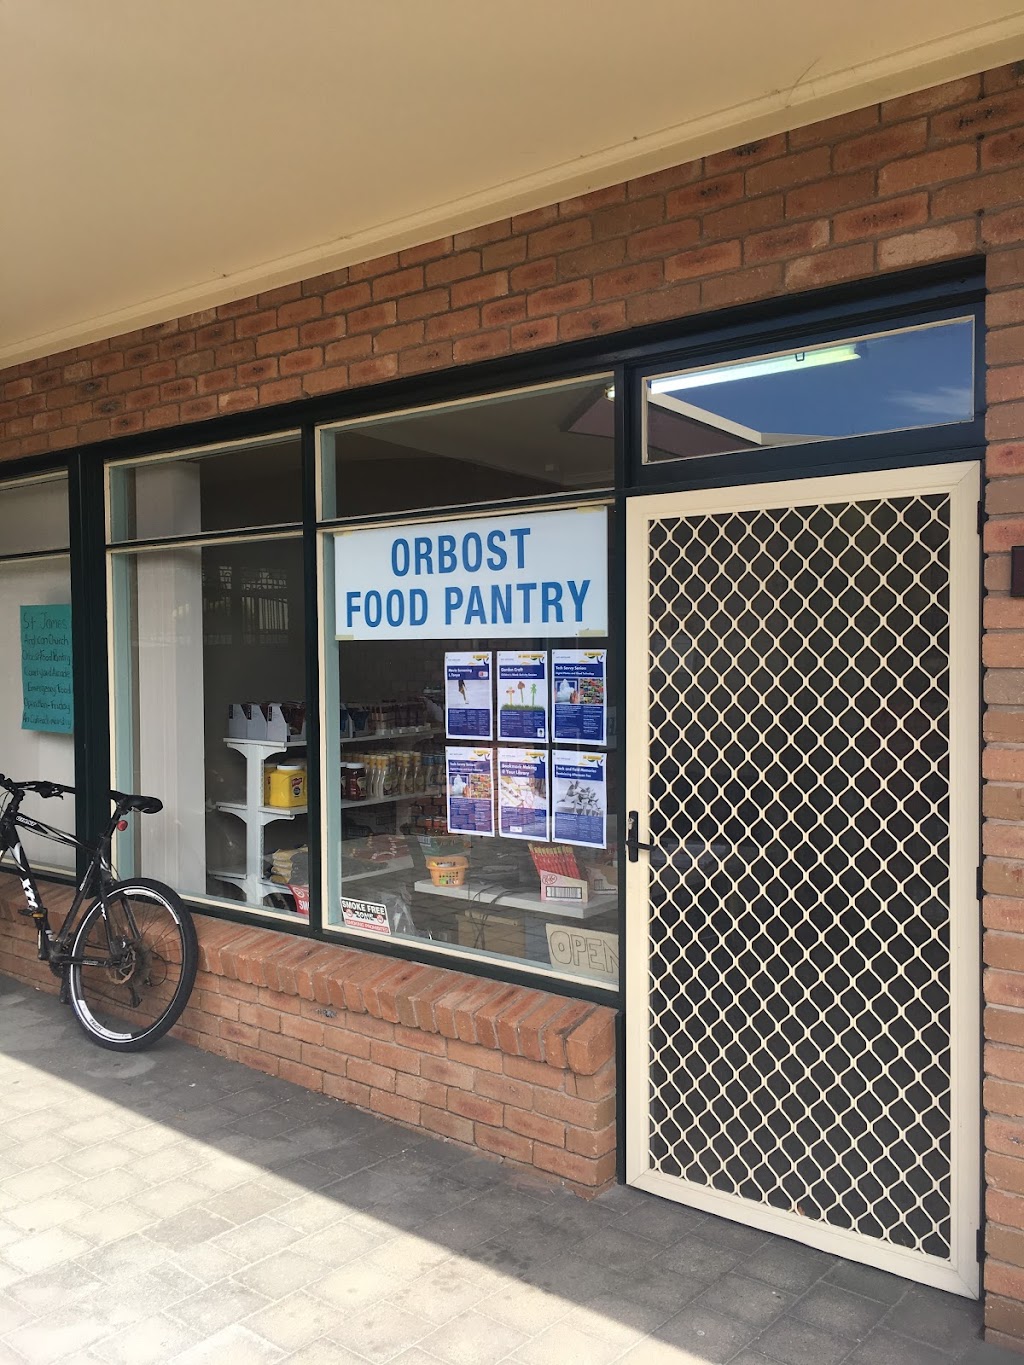 Orbost Food Pantry and Cafe | 144 Nicholson St, Orbost VIC 3888, Australia | Phone: 0417 355 930